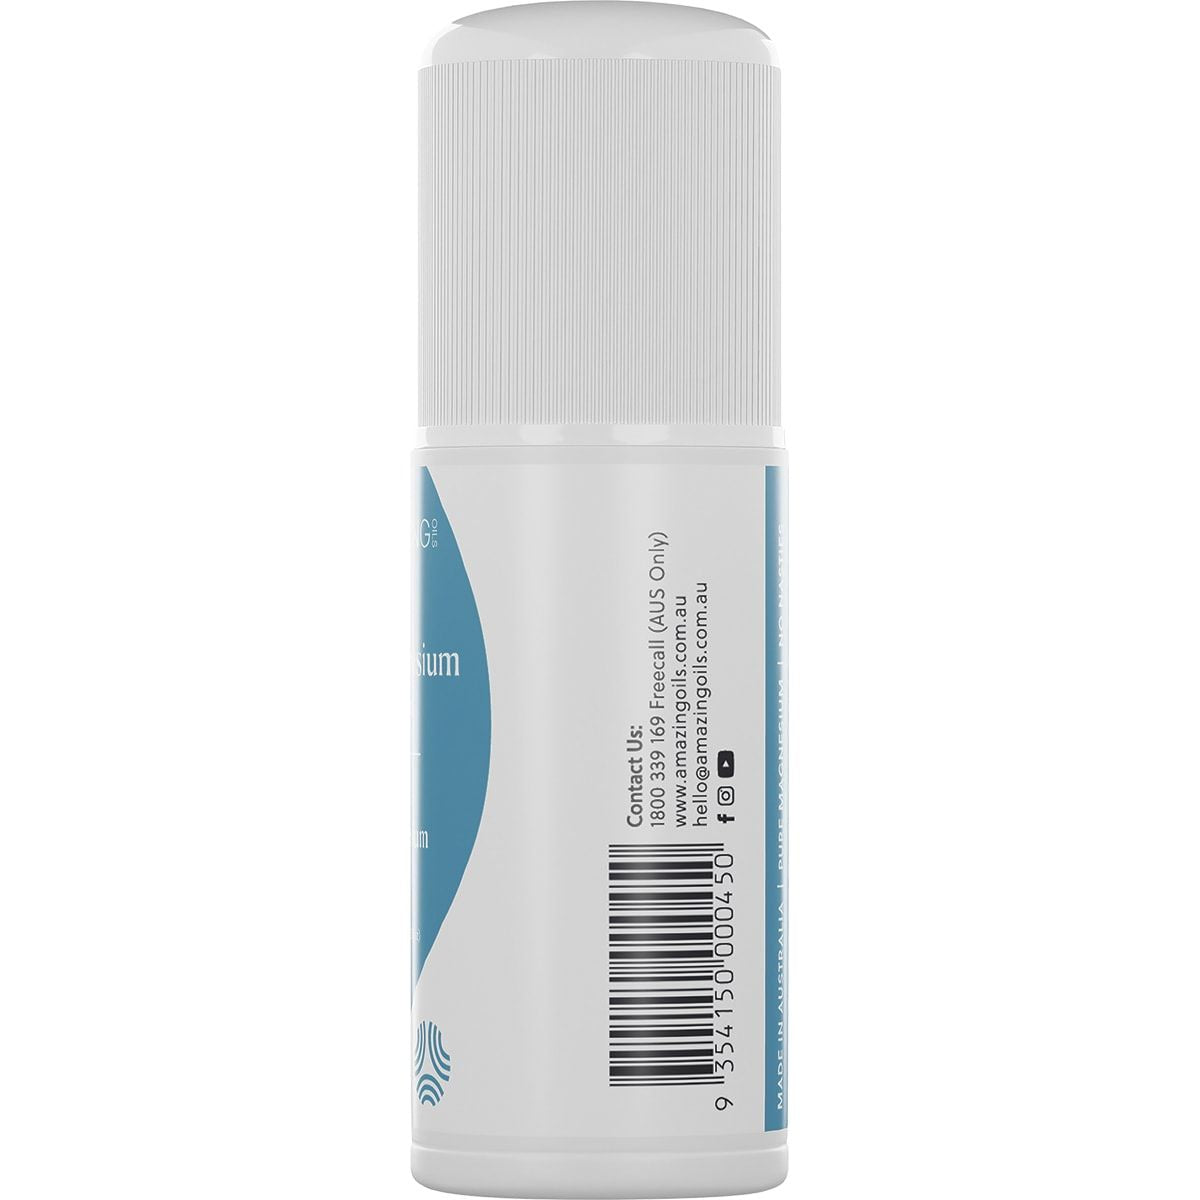 Amazing Oils Daily Magnesium Gel Roll-On